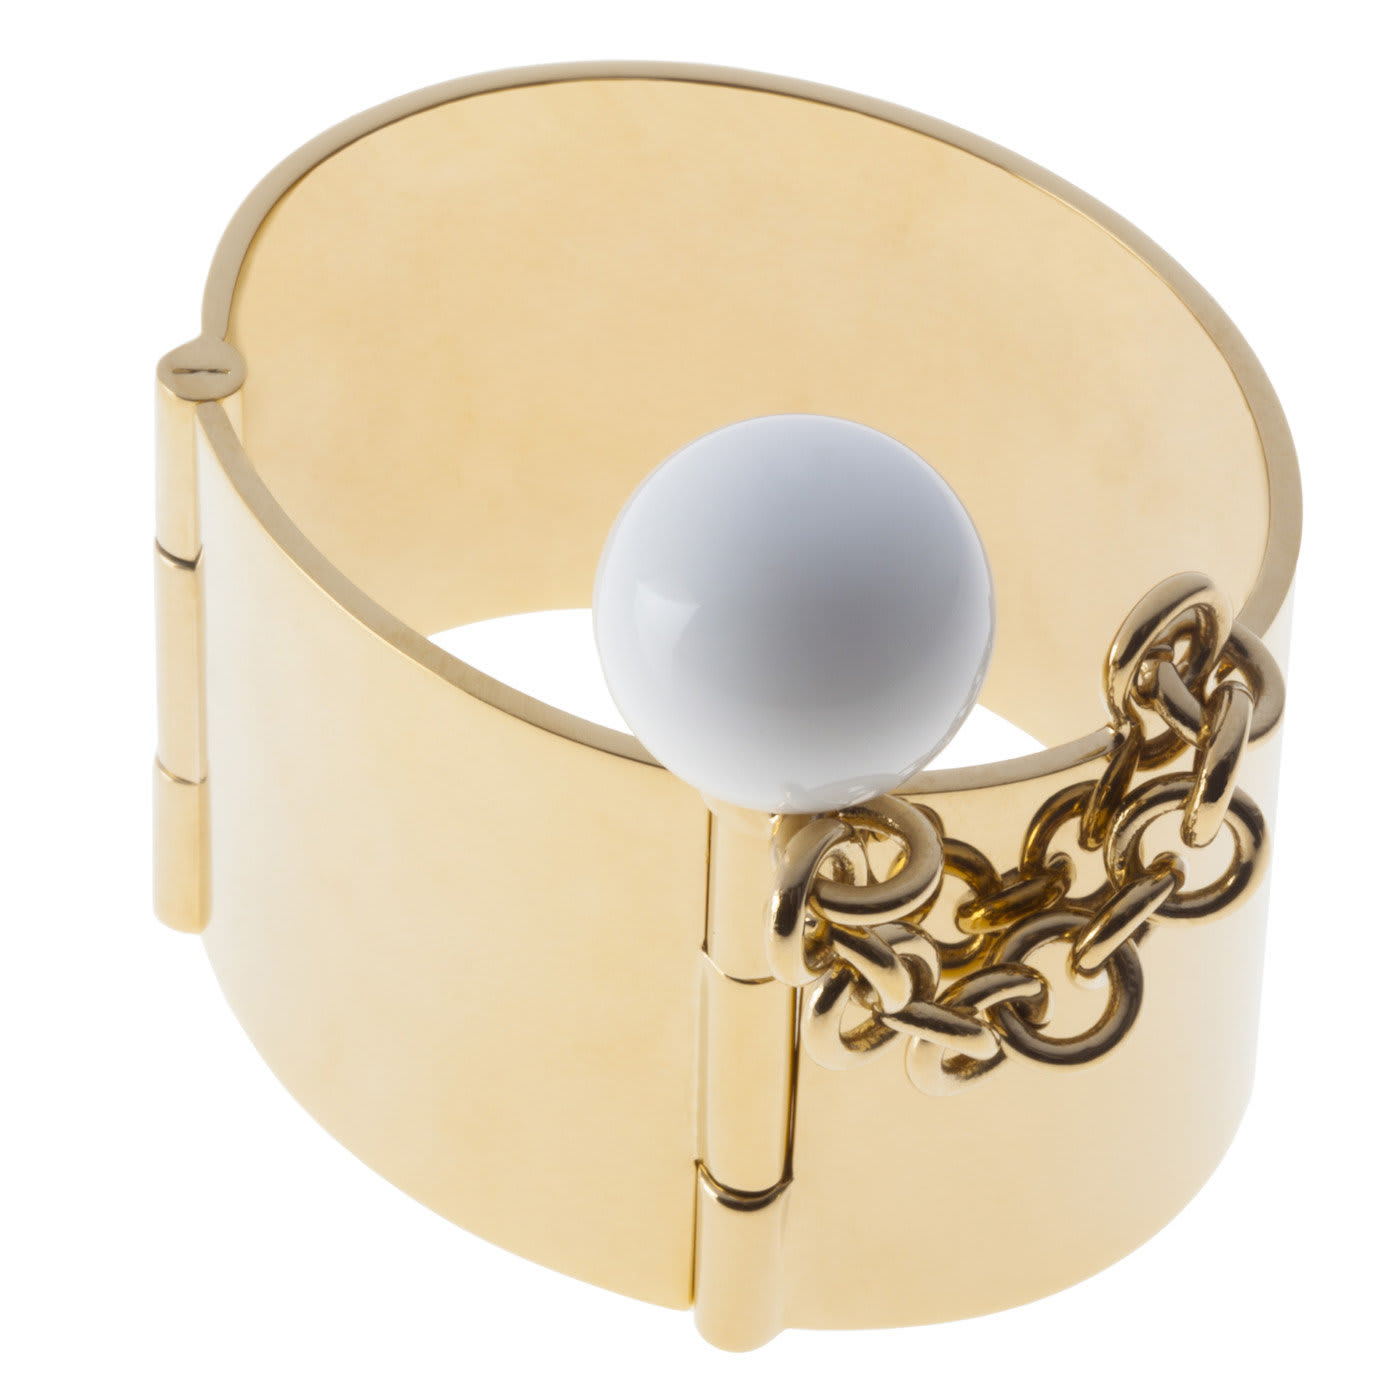 Gea Bracelet with White Sphere - May Moma